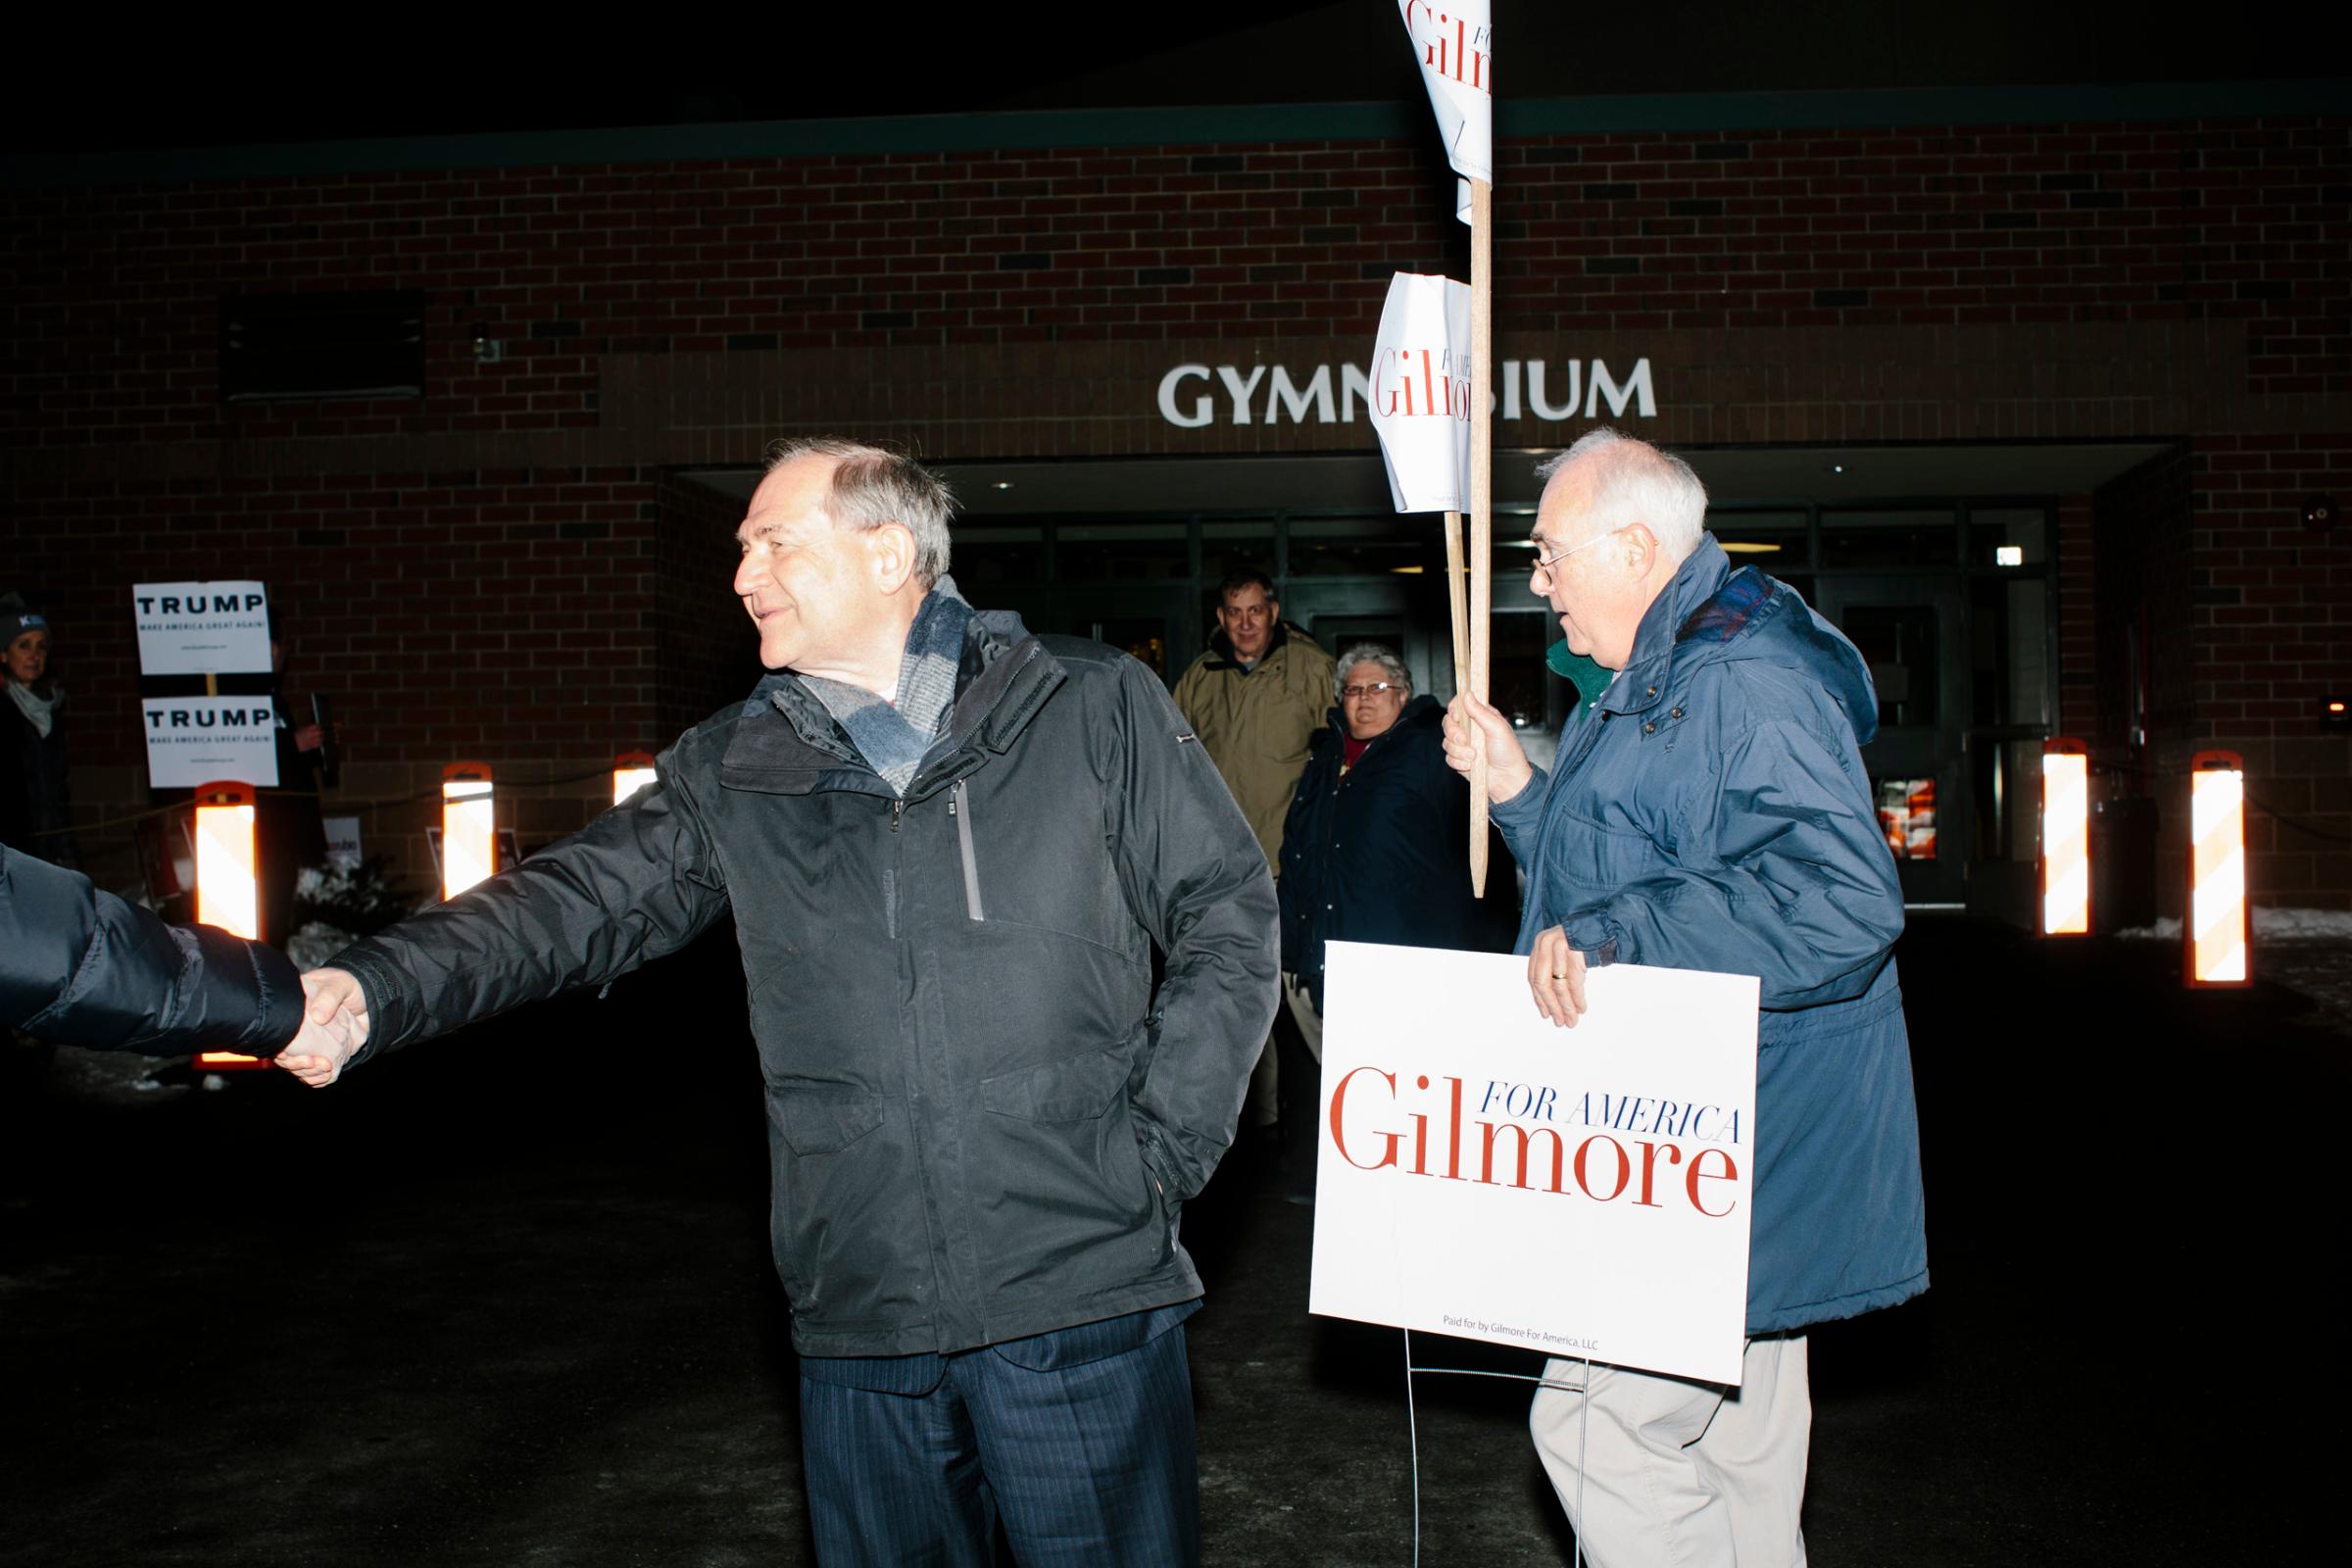 Former Virginia governor and Republican presidential candidate Jim Gilmore greets people outside the polling station at Bedford High School in Bedford New Hampshire, on the day of primary voting, Feb. 9, 2016. Gilmore finished in last place among major Republican candidates still in the race with a total of 150 votes.